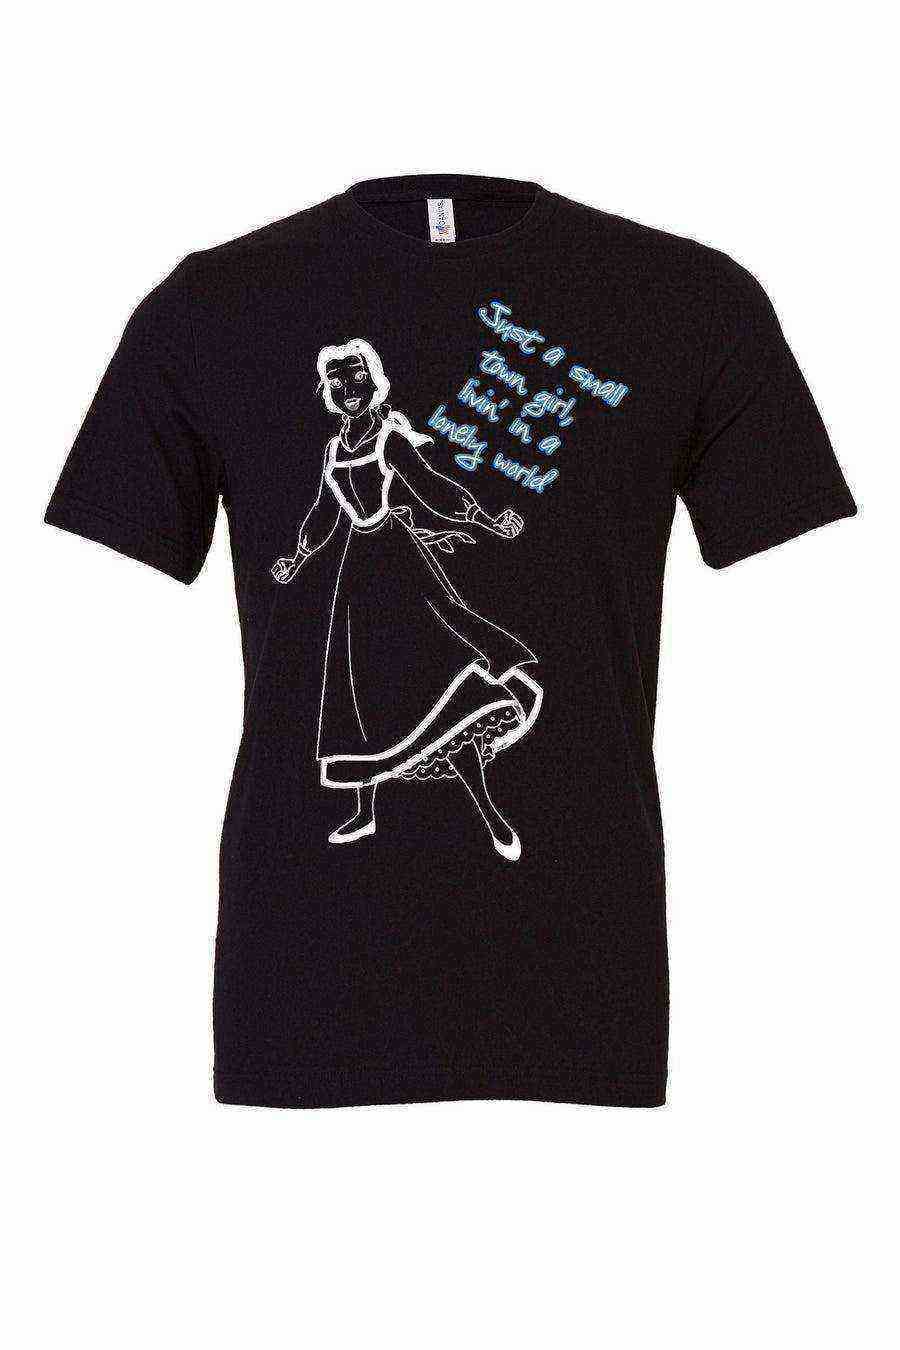 Toddler | Beauty and The Beast Journey Shirt | Just A Small Town Girl - Dylan's Tees